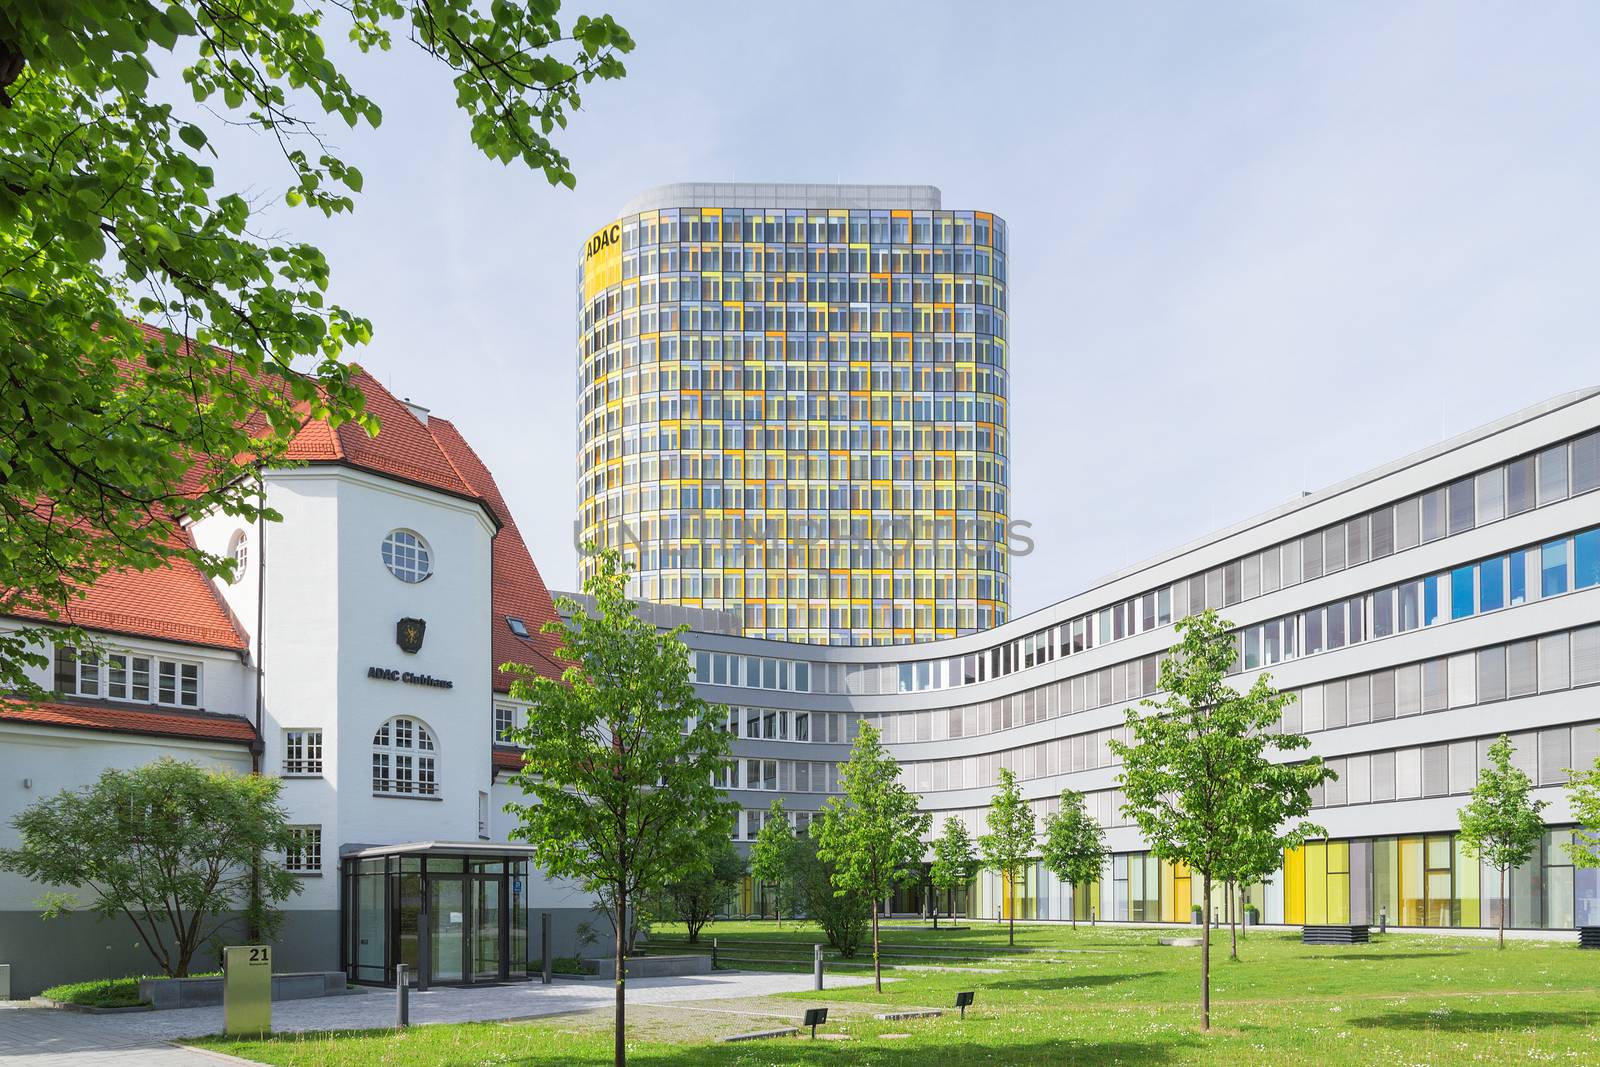 Munich, Germany - May 12, 2015: Old small clubhouse and the new ADAC Headquarters with 18-storey office tower rises above a 5-storey base which accommodates 2,400 employees.